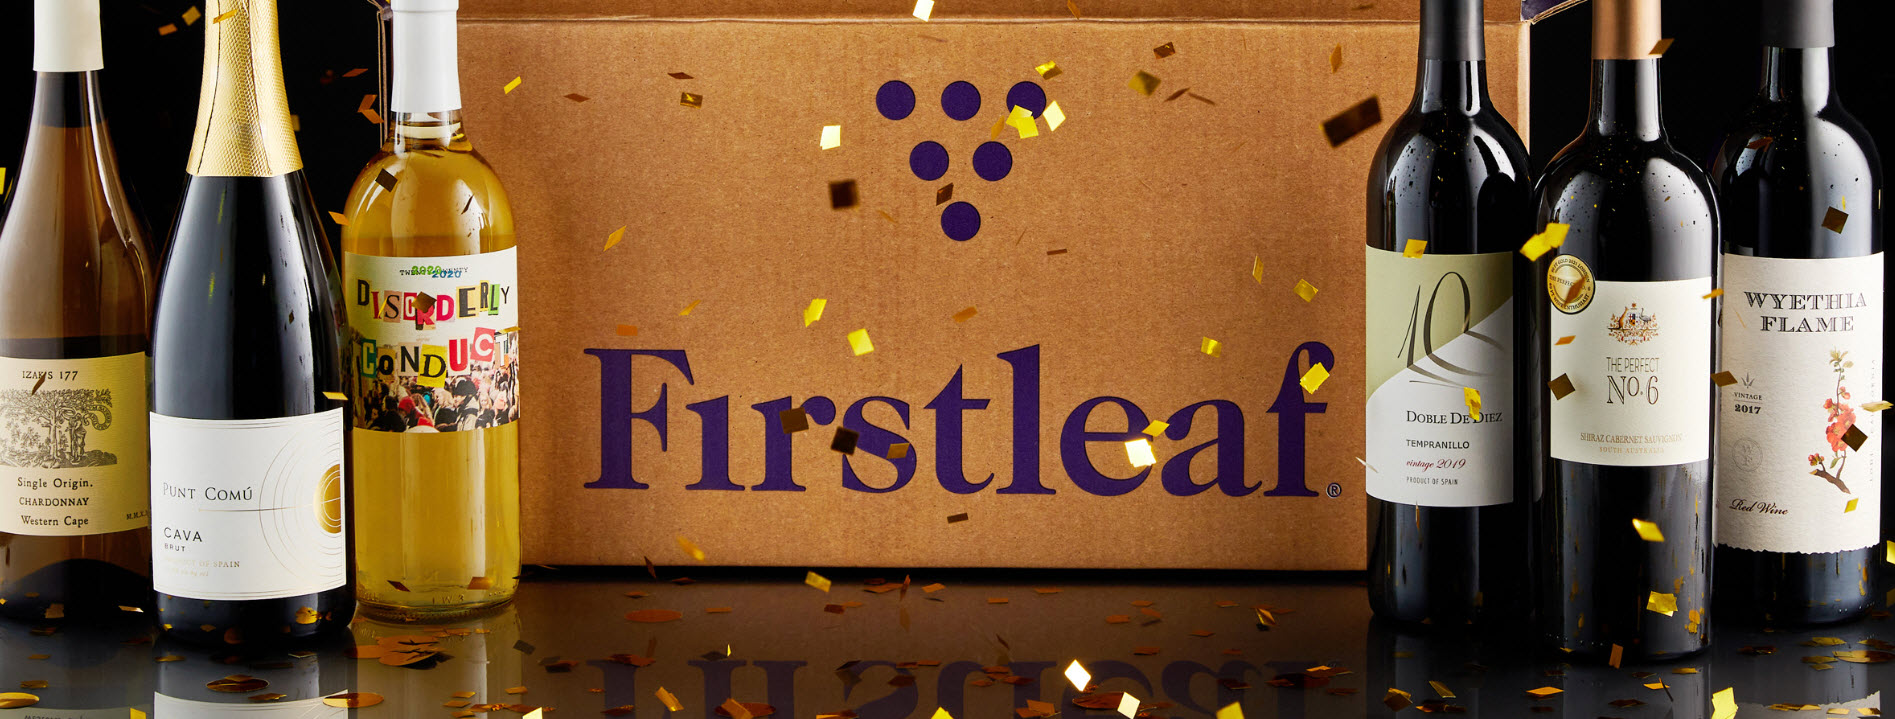 first leaf wine deal new year